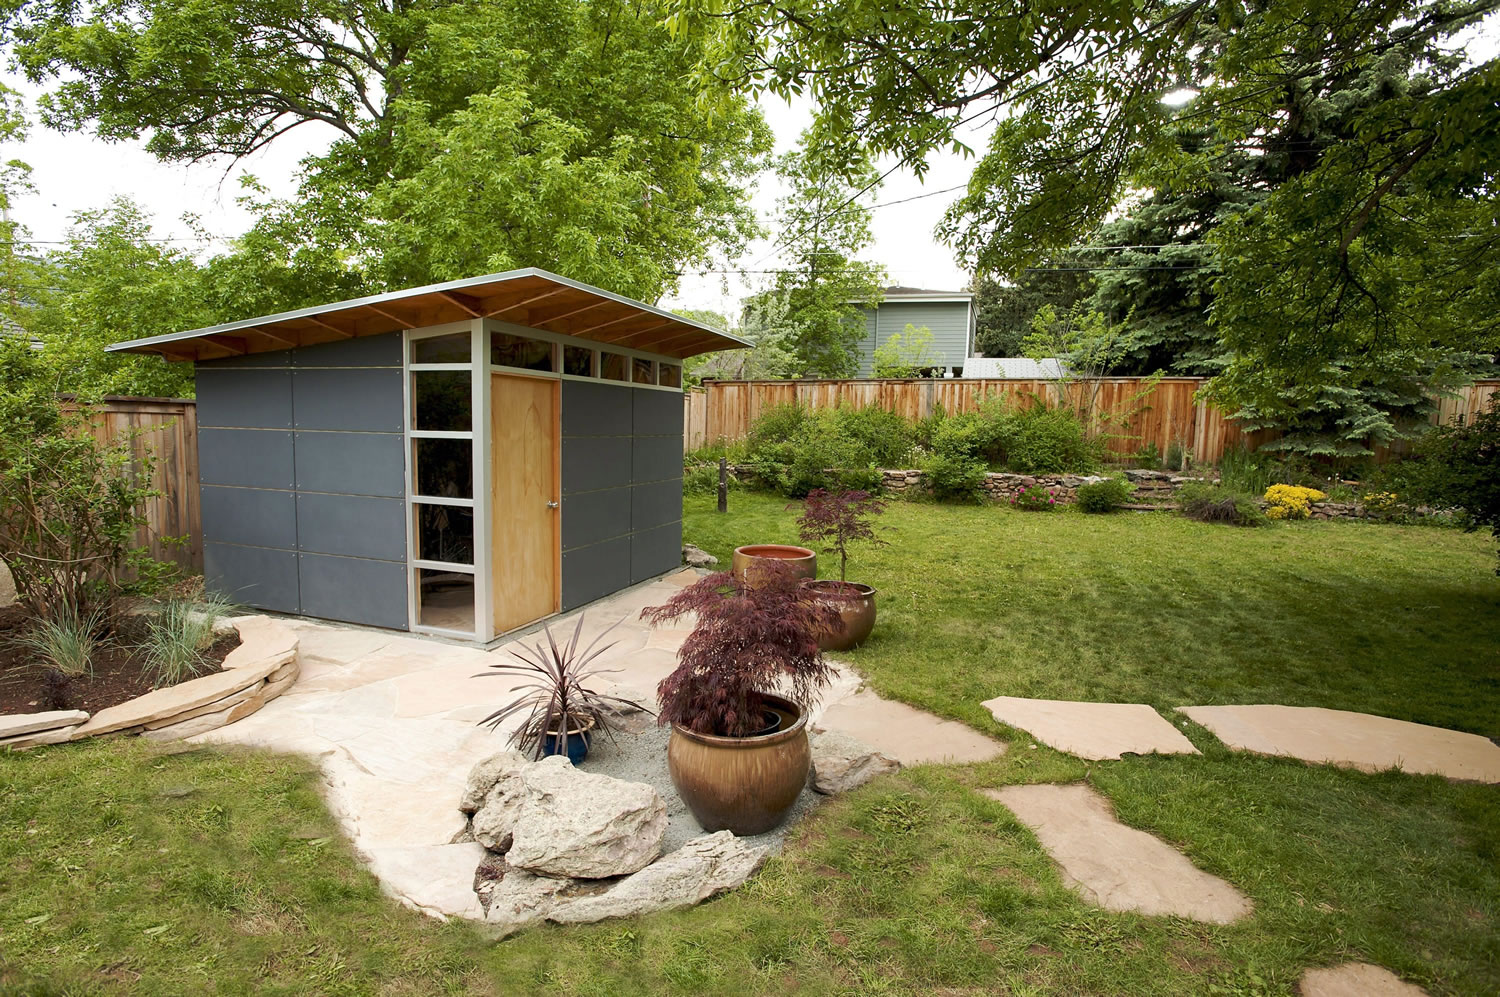 The original Studio Shed storage model was designed and built in 2006.